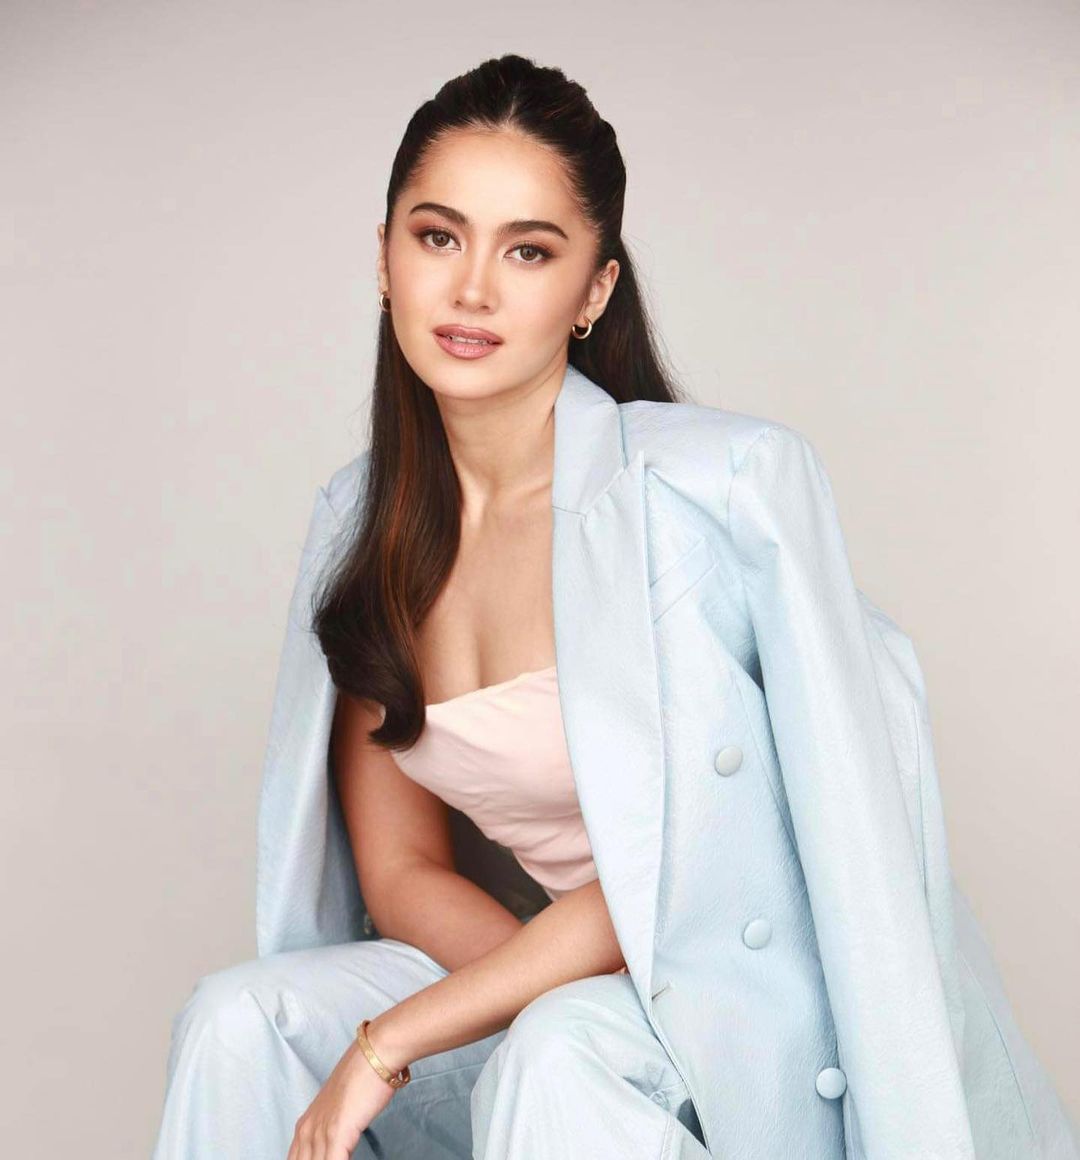 PHOTOS: Chic Outfits We're Copying From Atasha Muhlach